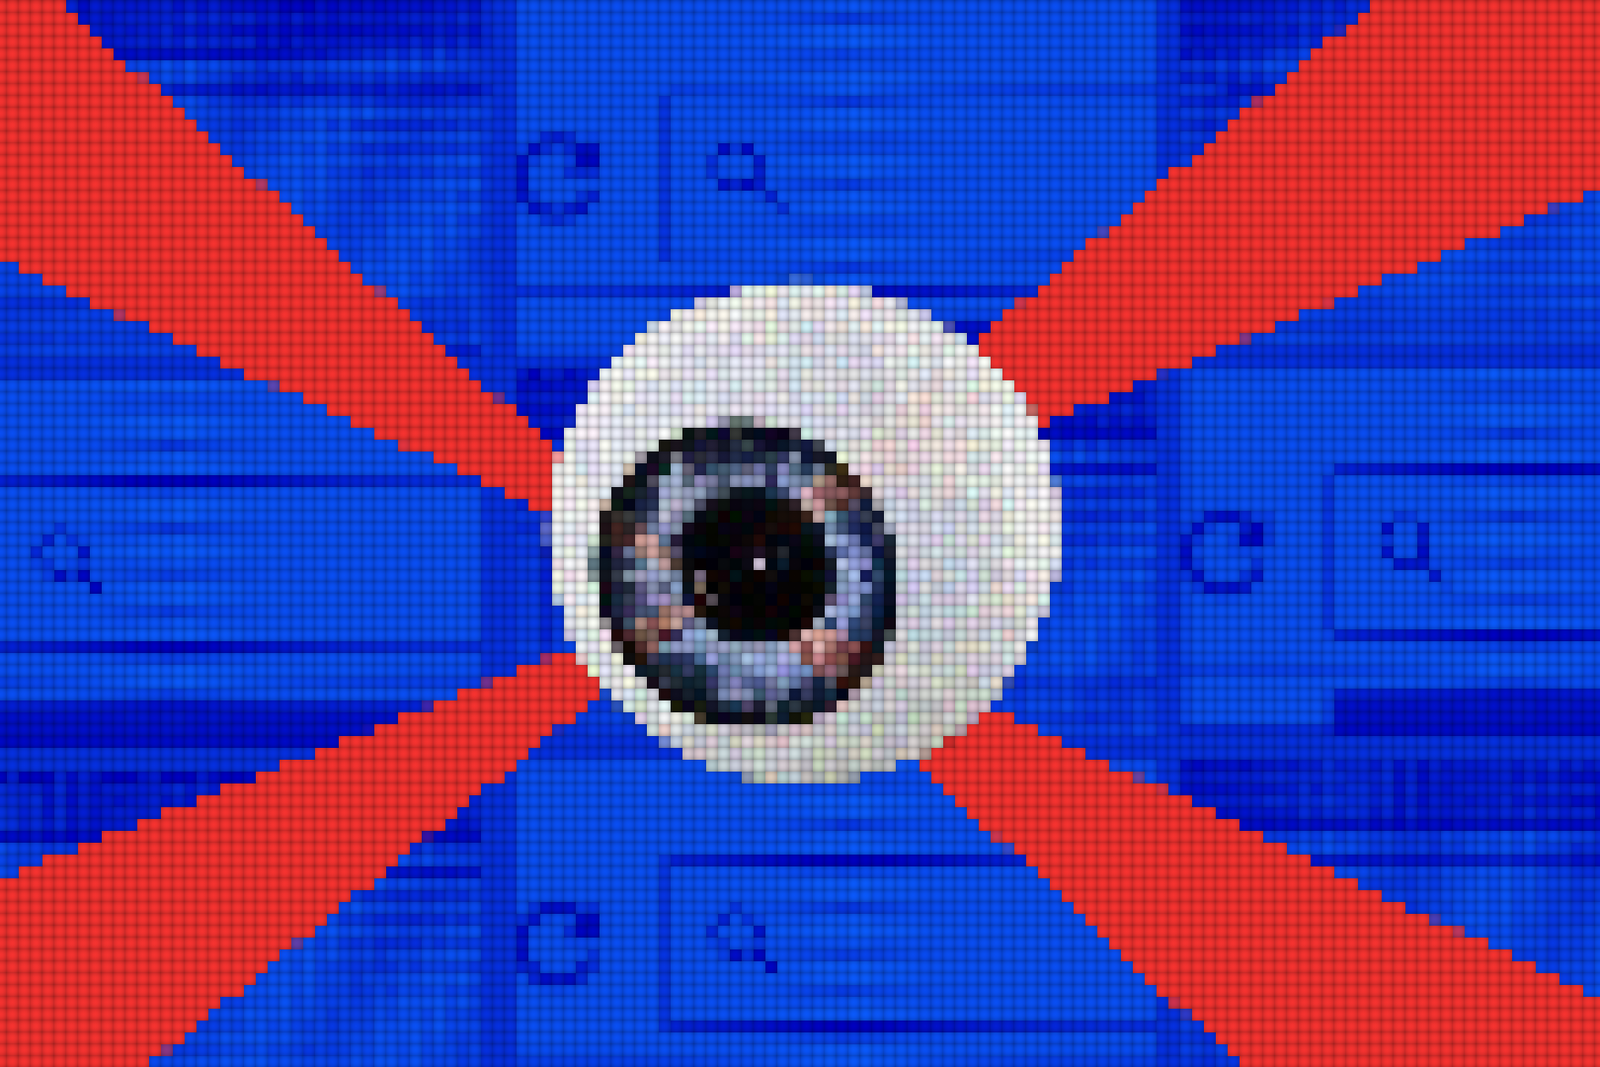 An eyeball giving out red rays against a blue background made of multiple web browsers.